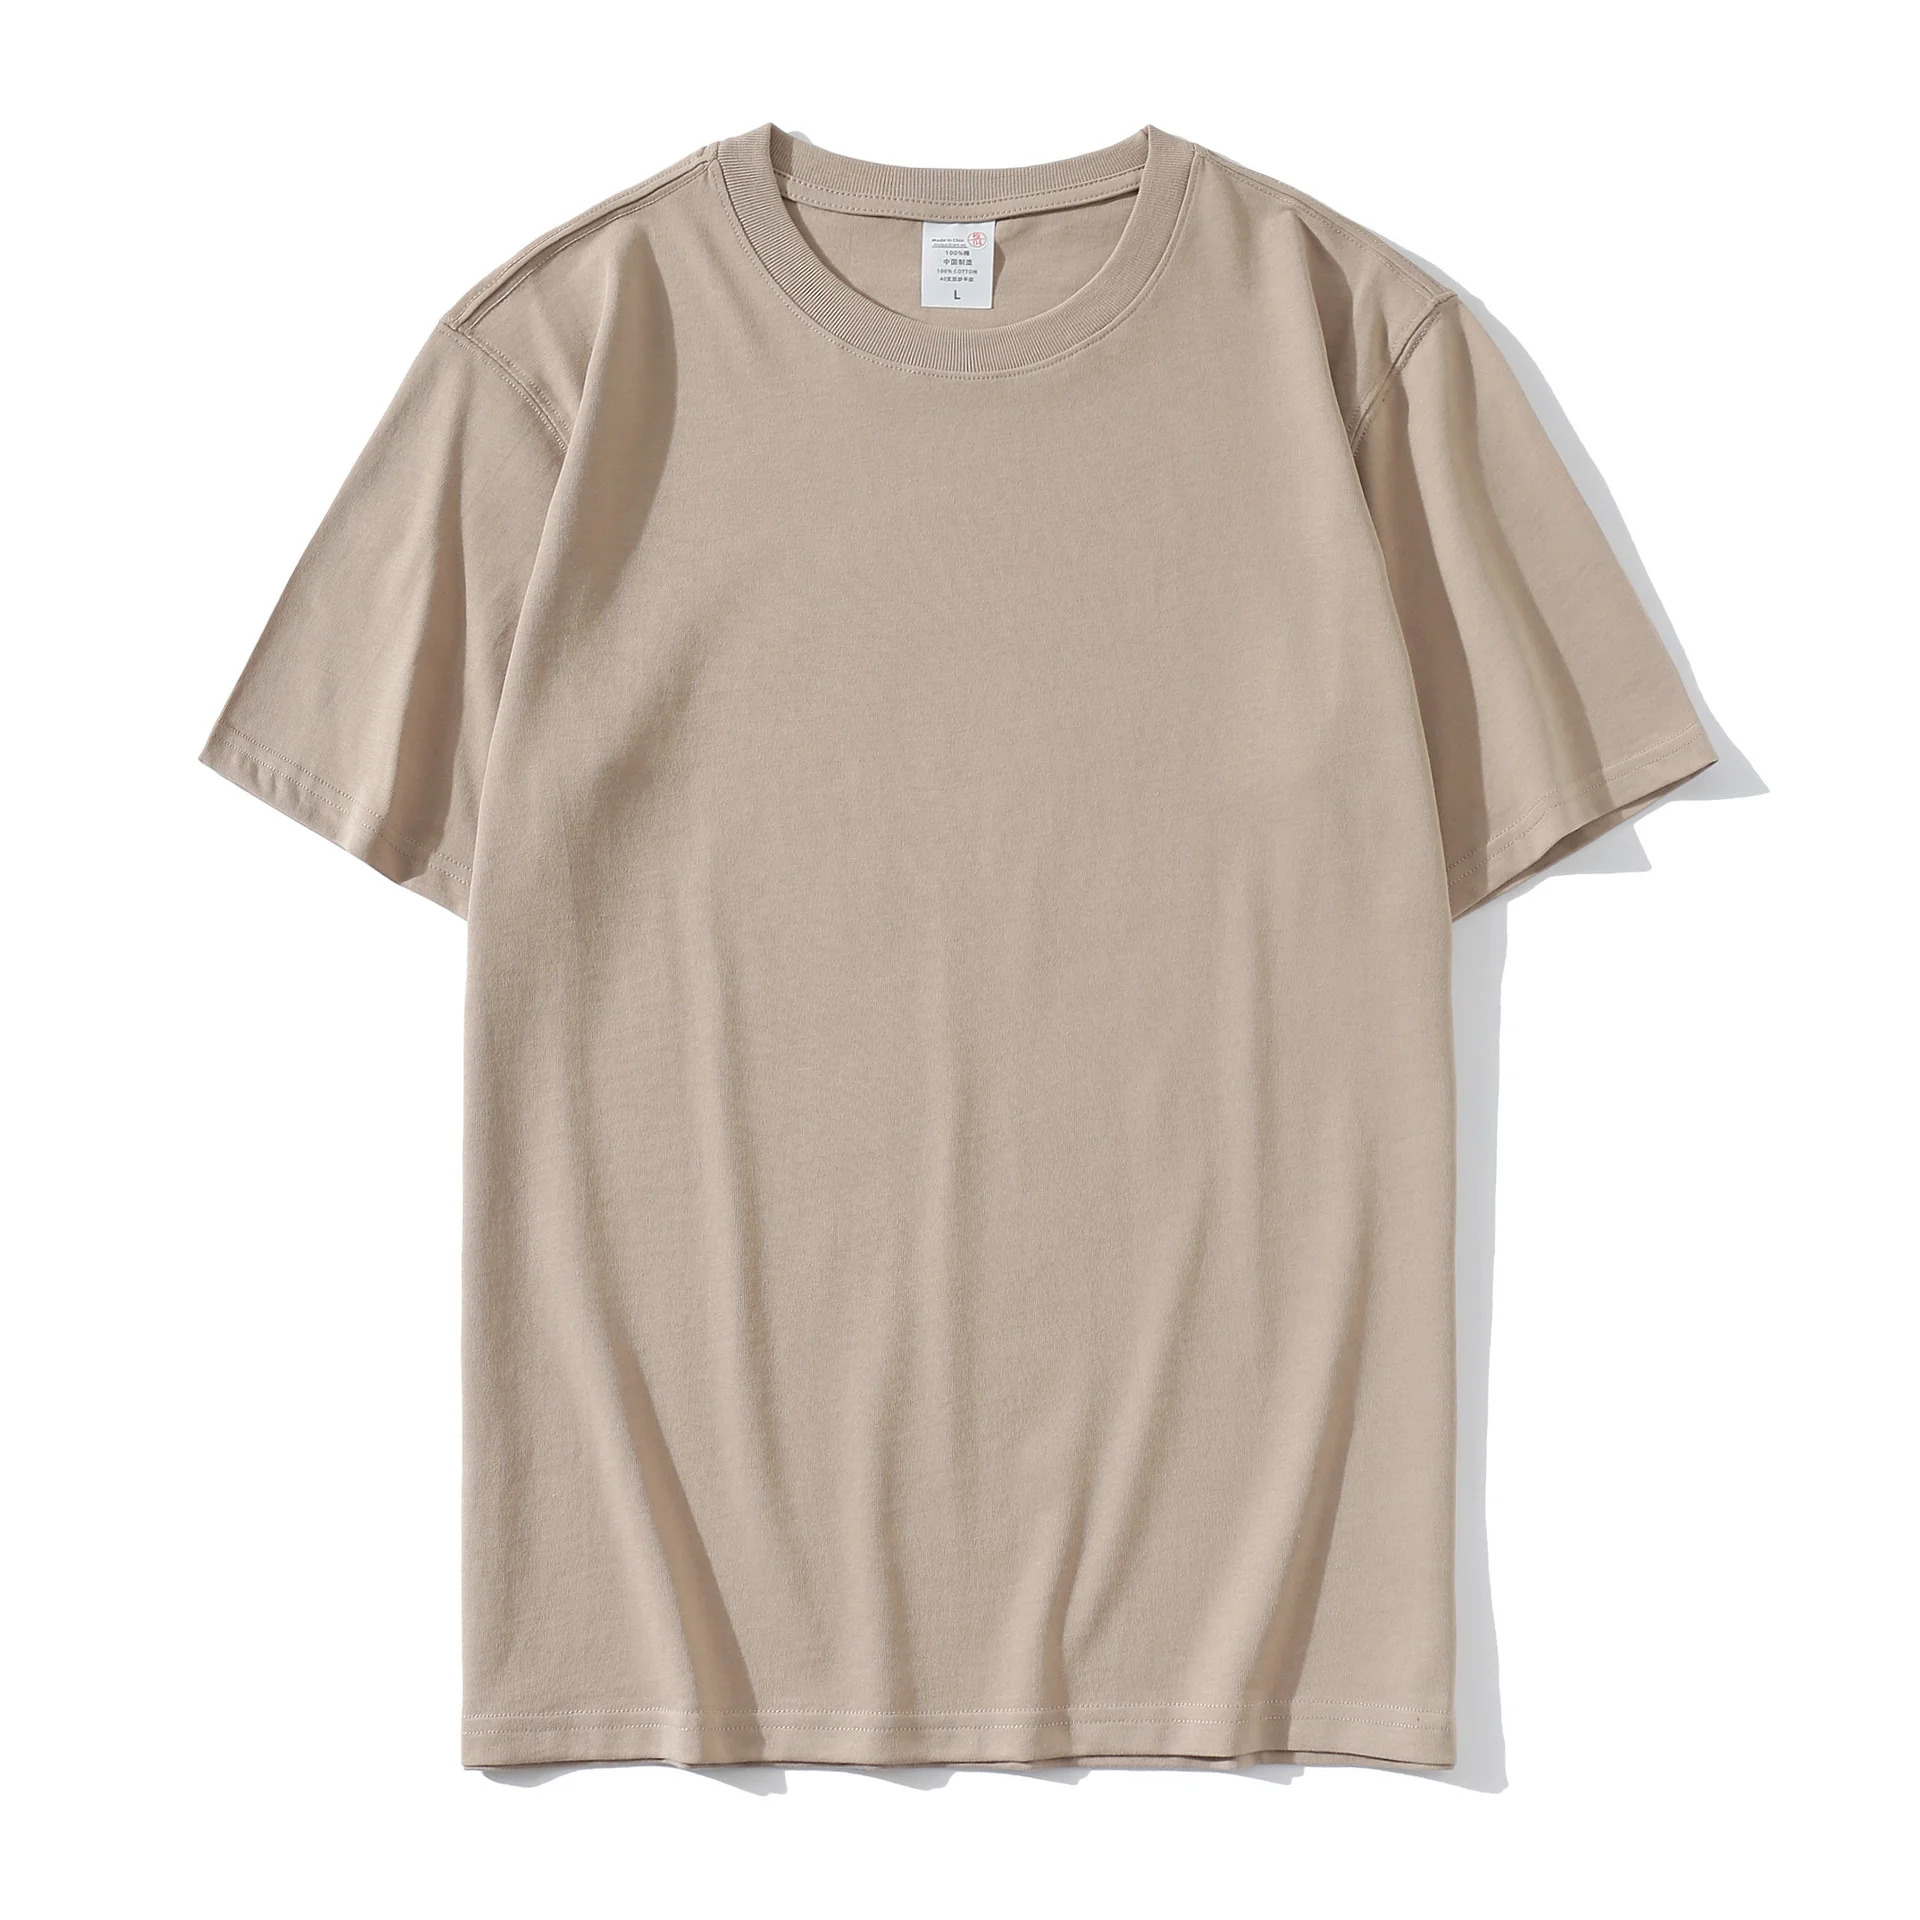 distressed blank t-shirts - Bangladesh Factory, Suppliers, Manufacturers